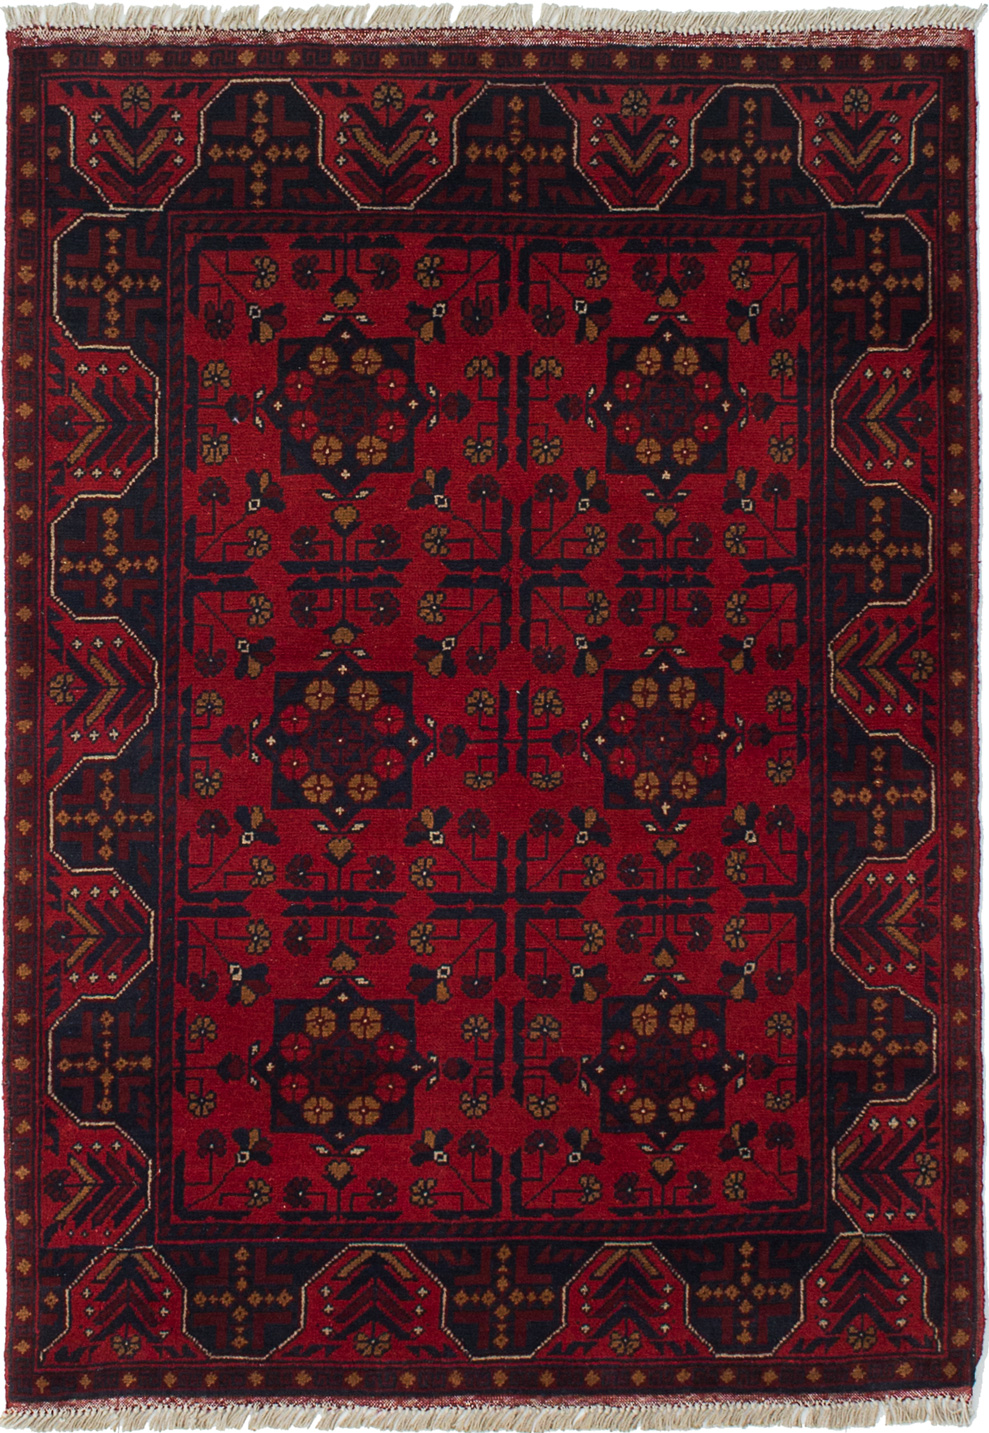 Hand-knotted Finest Khal Mohammadi Red Wool Rug 3'5" x 4'10" (24) Size: 3'5" x 4'10"  